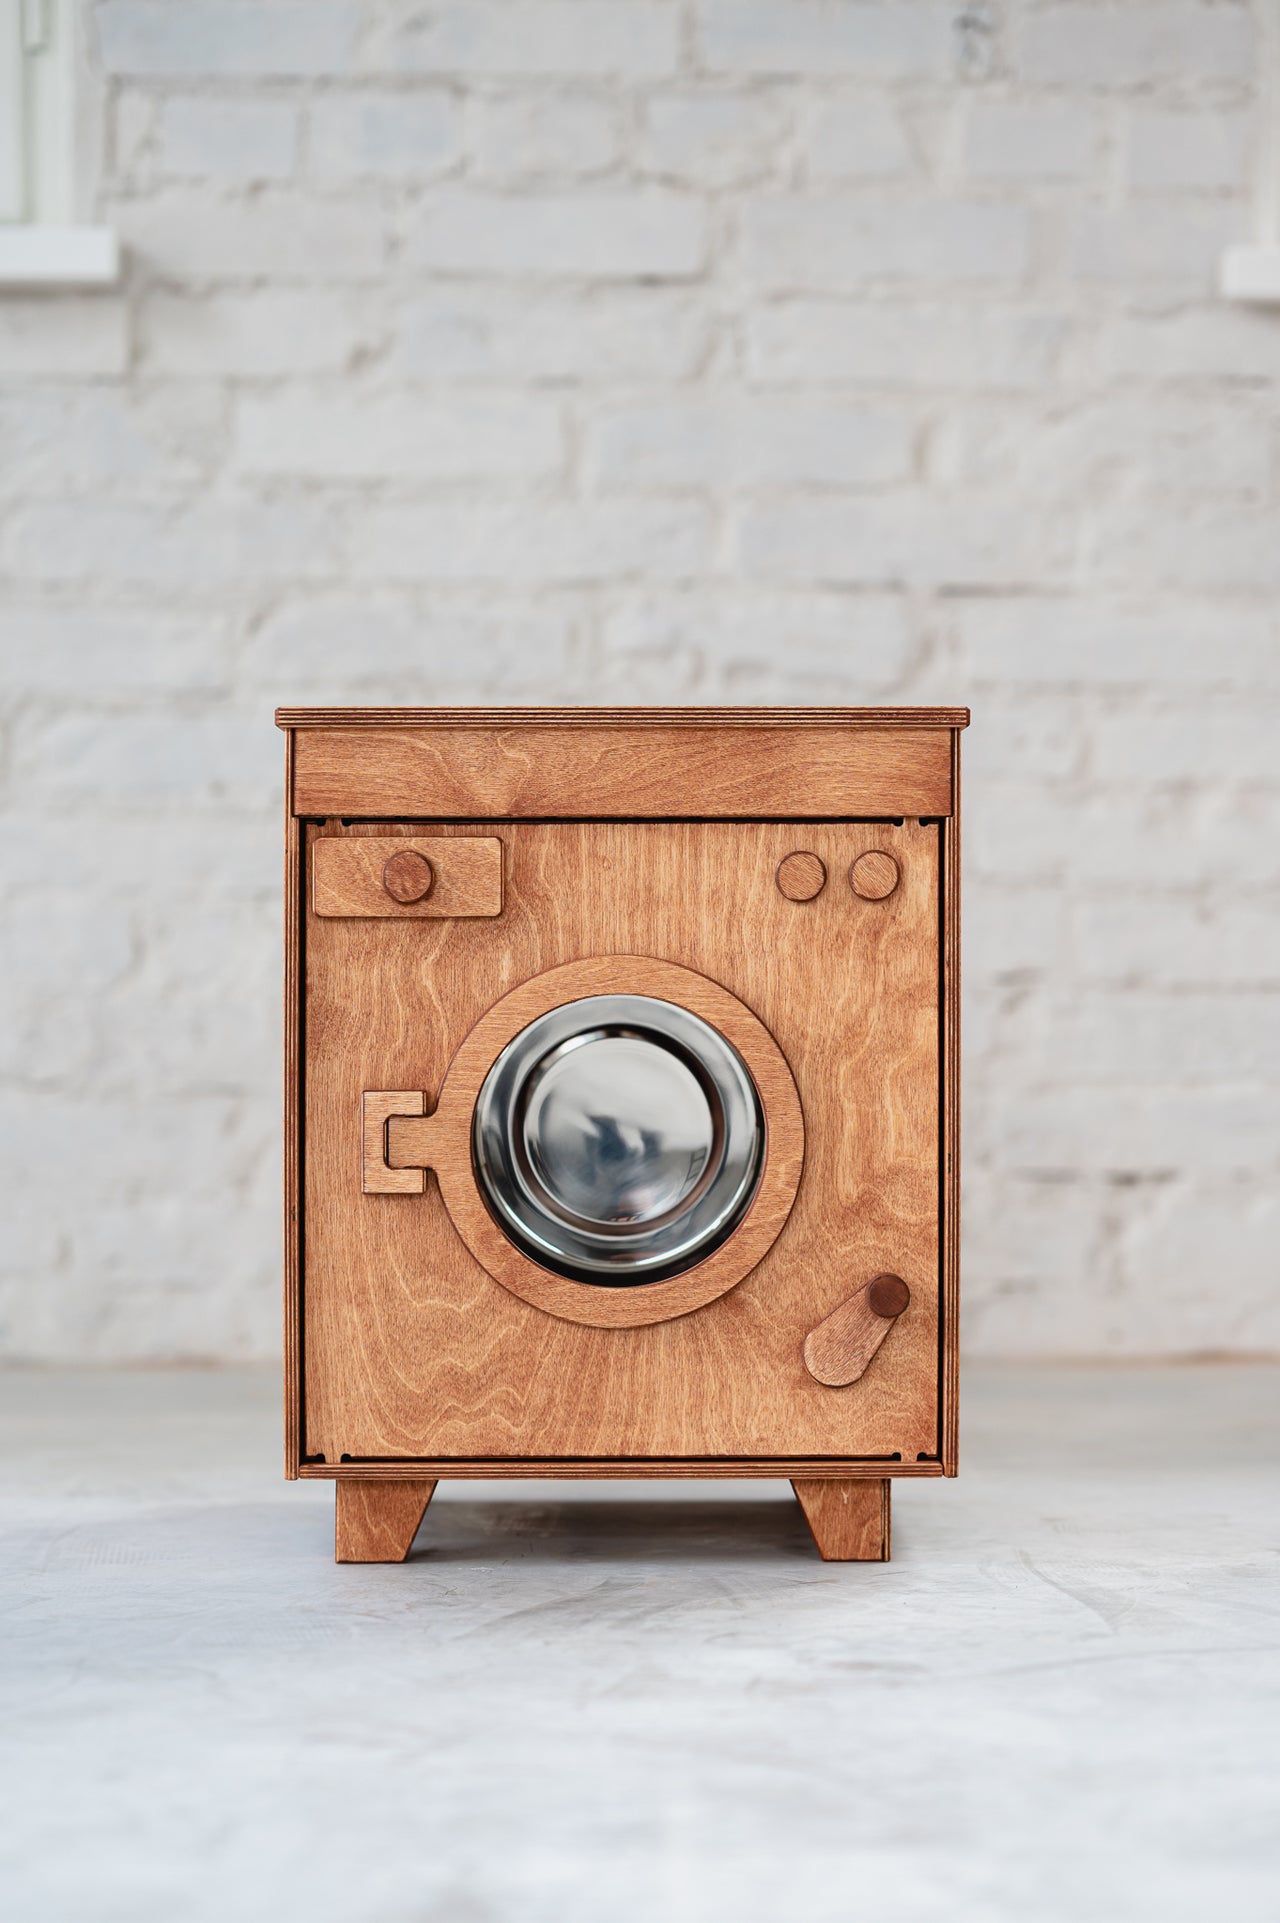 Wooden Washing Machine - Dusty Green - MIDMINI - Handcrafted wooden toys for generations.